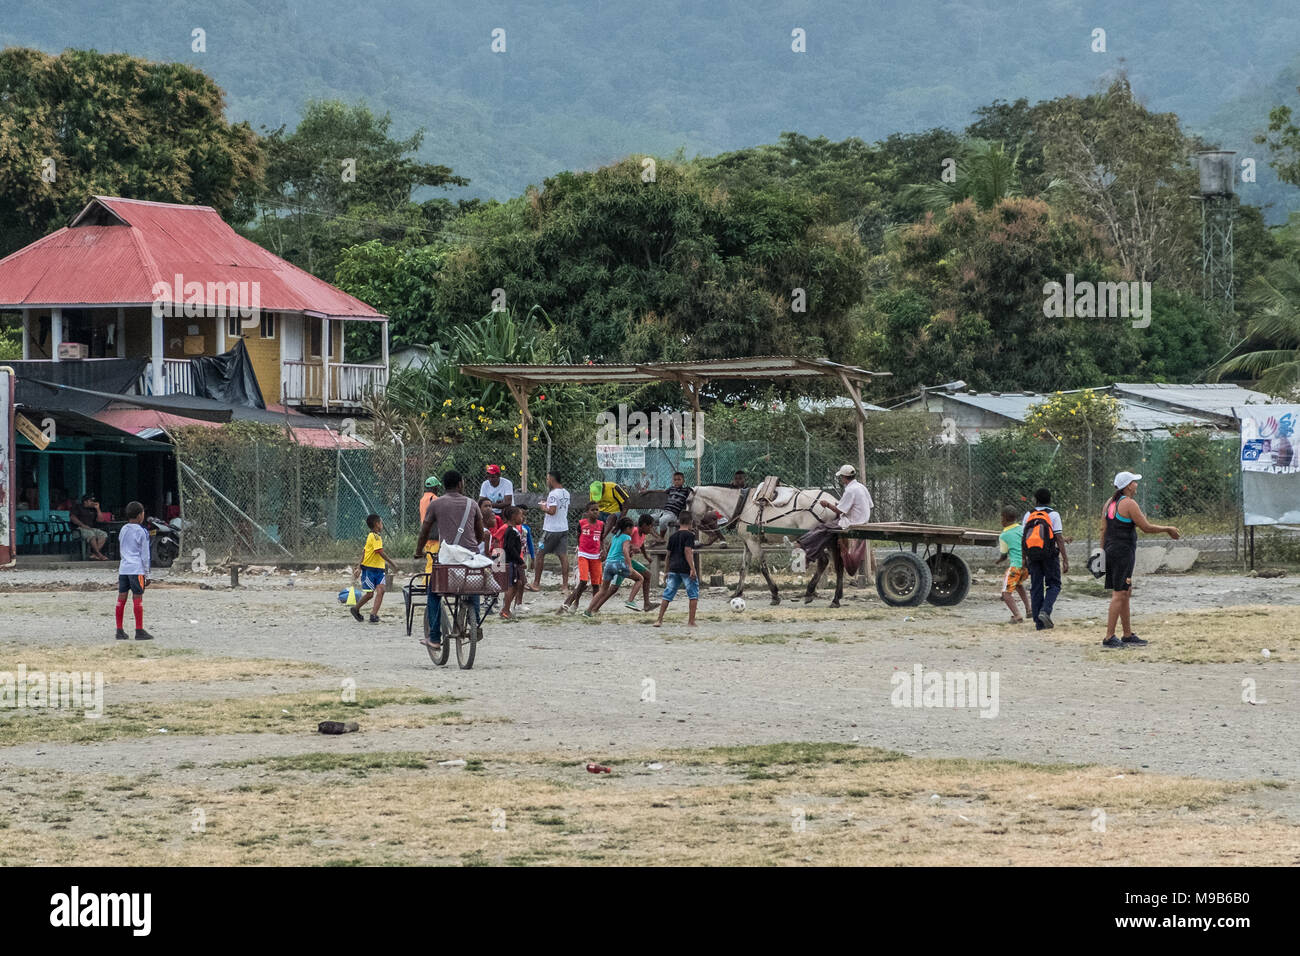 Capurgana, Colombia - march 2018: Kids playing soccer in the streets of  Capurgana, Colombia Stock Photo